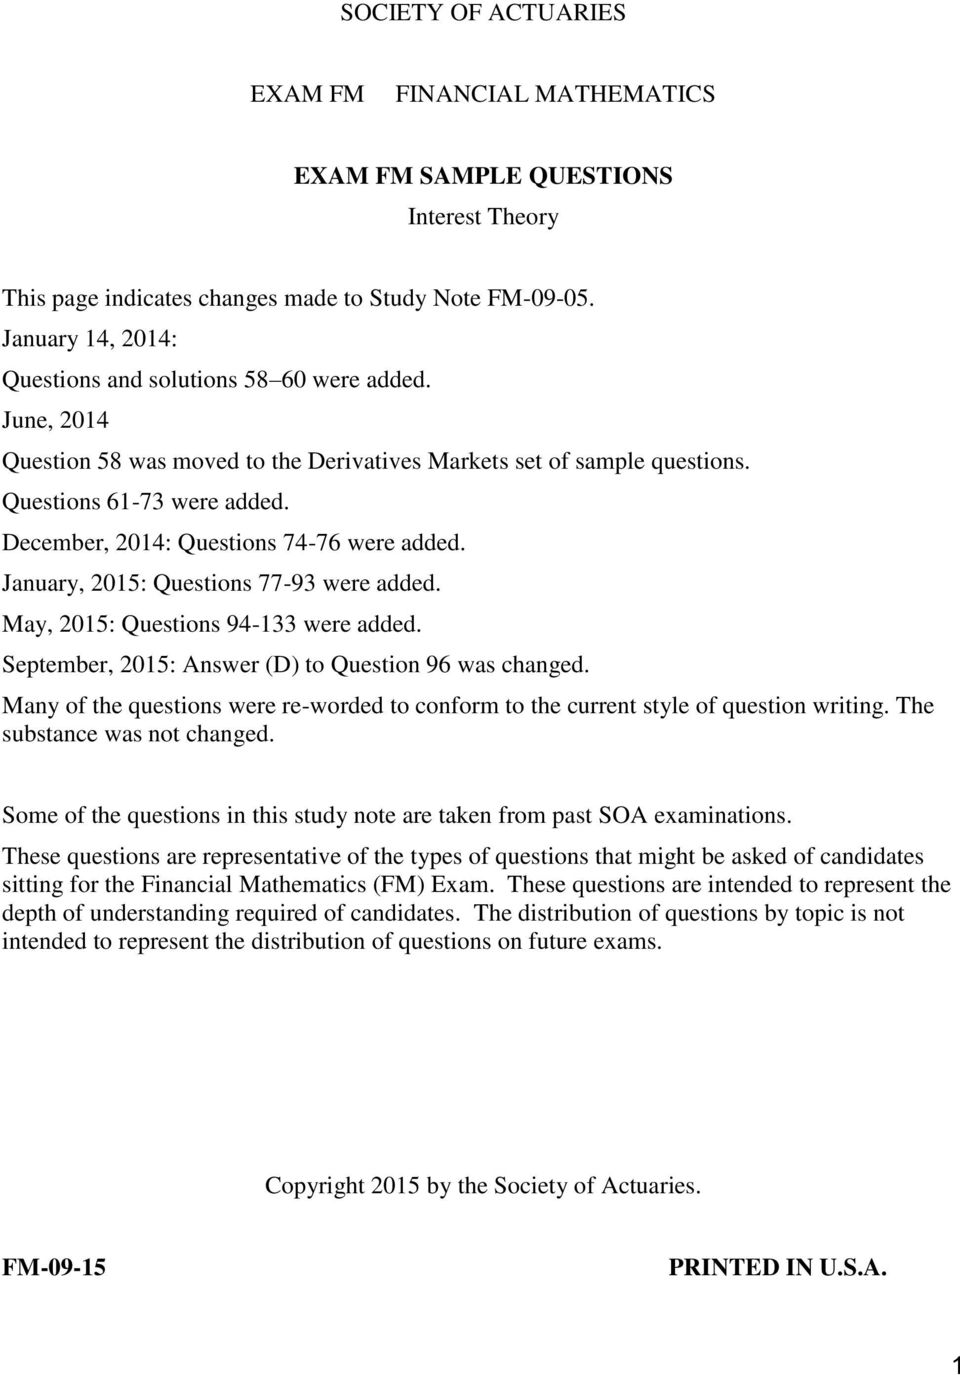 December, 2014: Questions 74-76 were added. January, 2015: Questions 77-93 were added. May, 2015: Questions 94-133 were added. September, 2015: Answer (D) to Question 96 was changed.